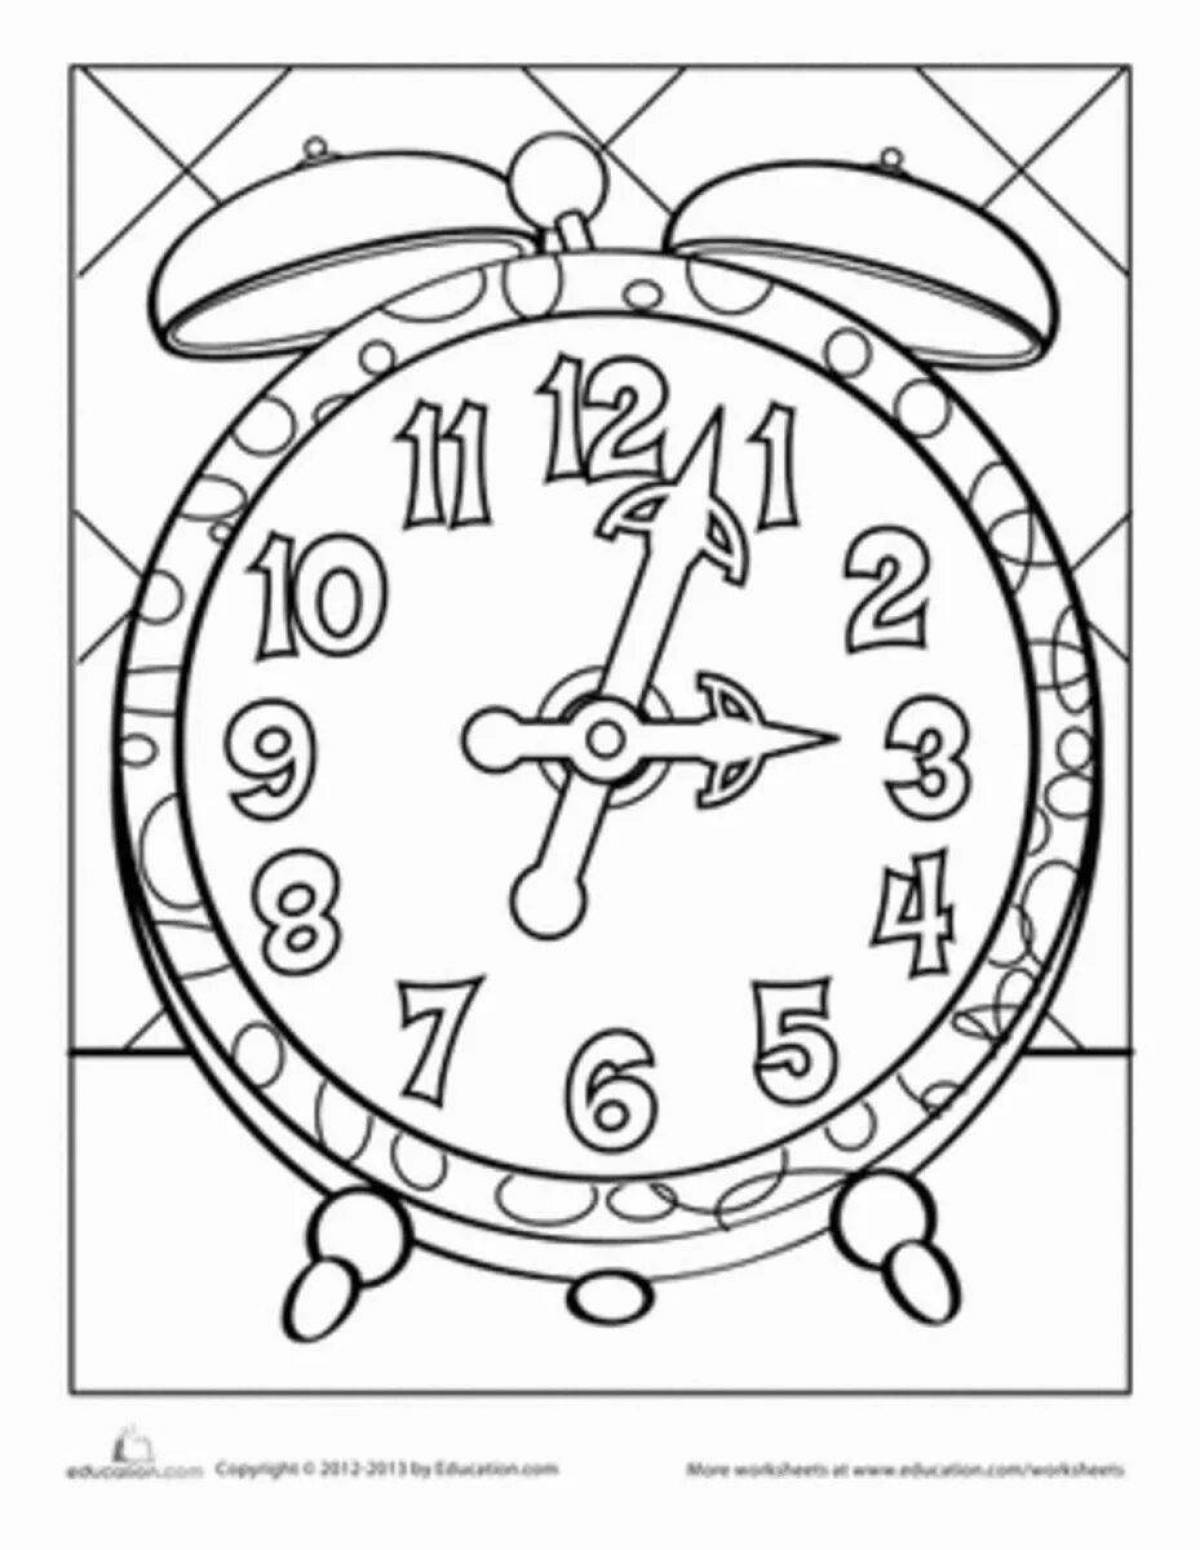 Colorful tick tock coloring page